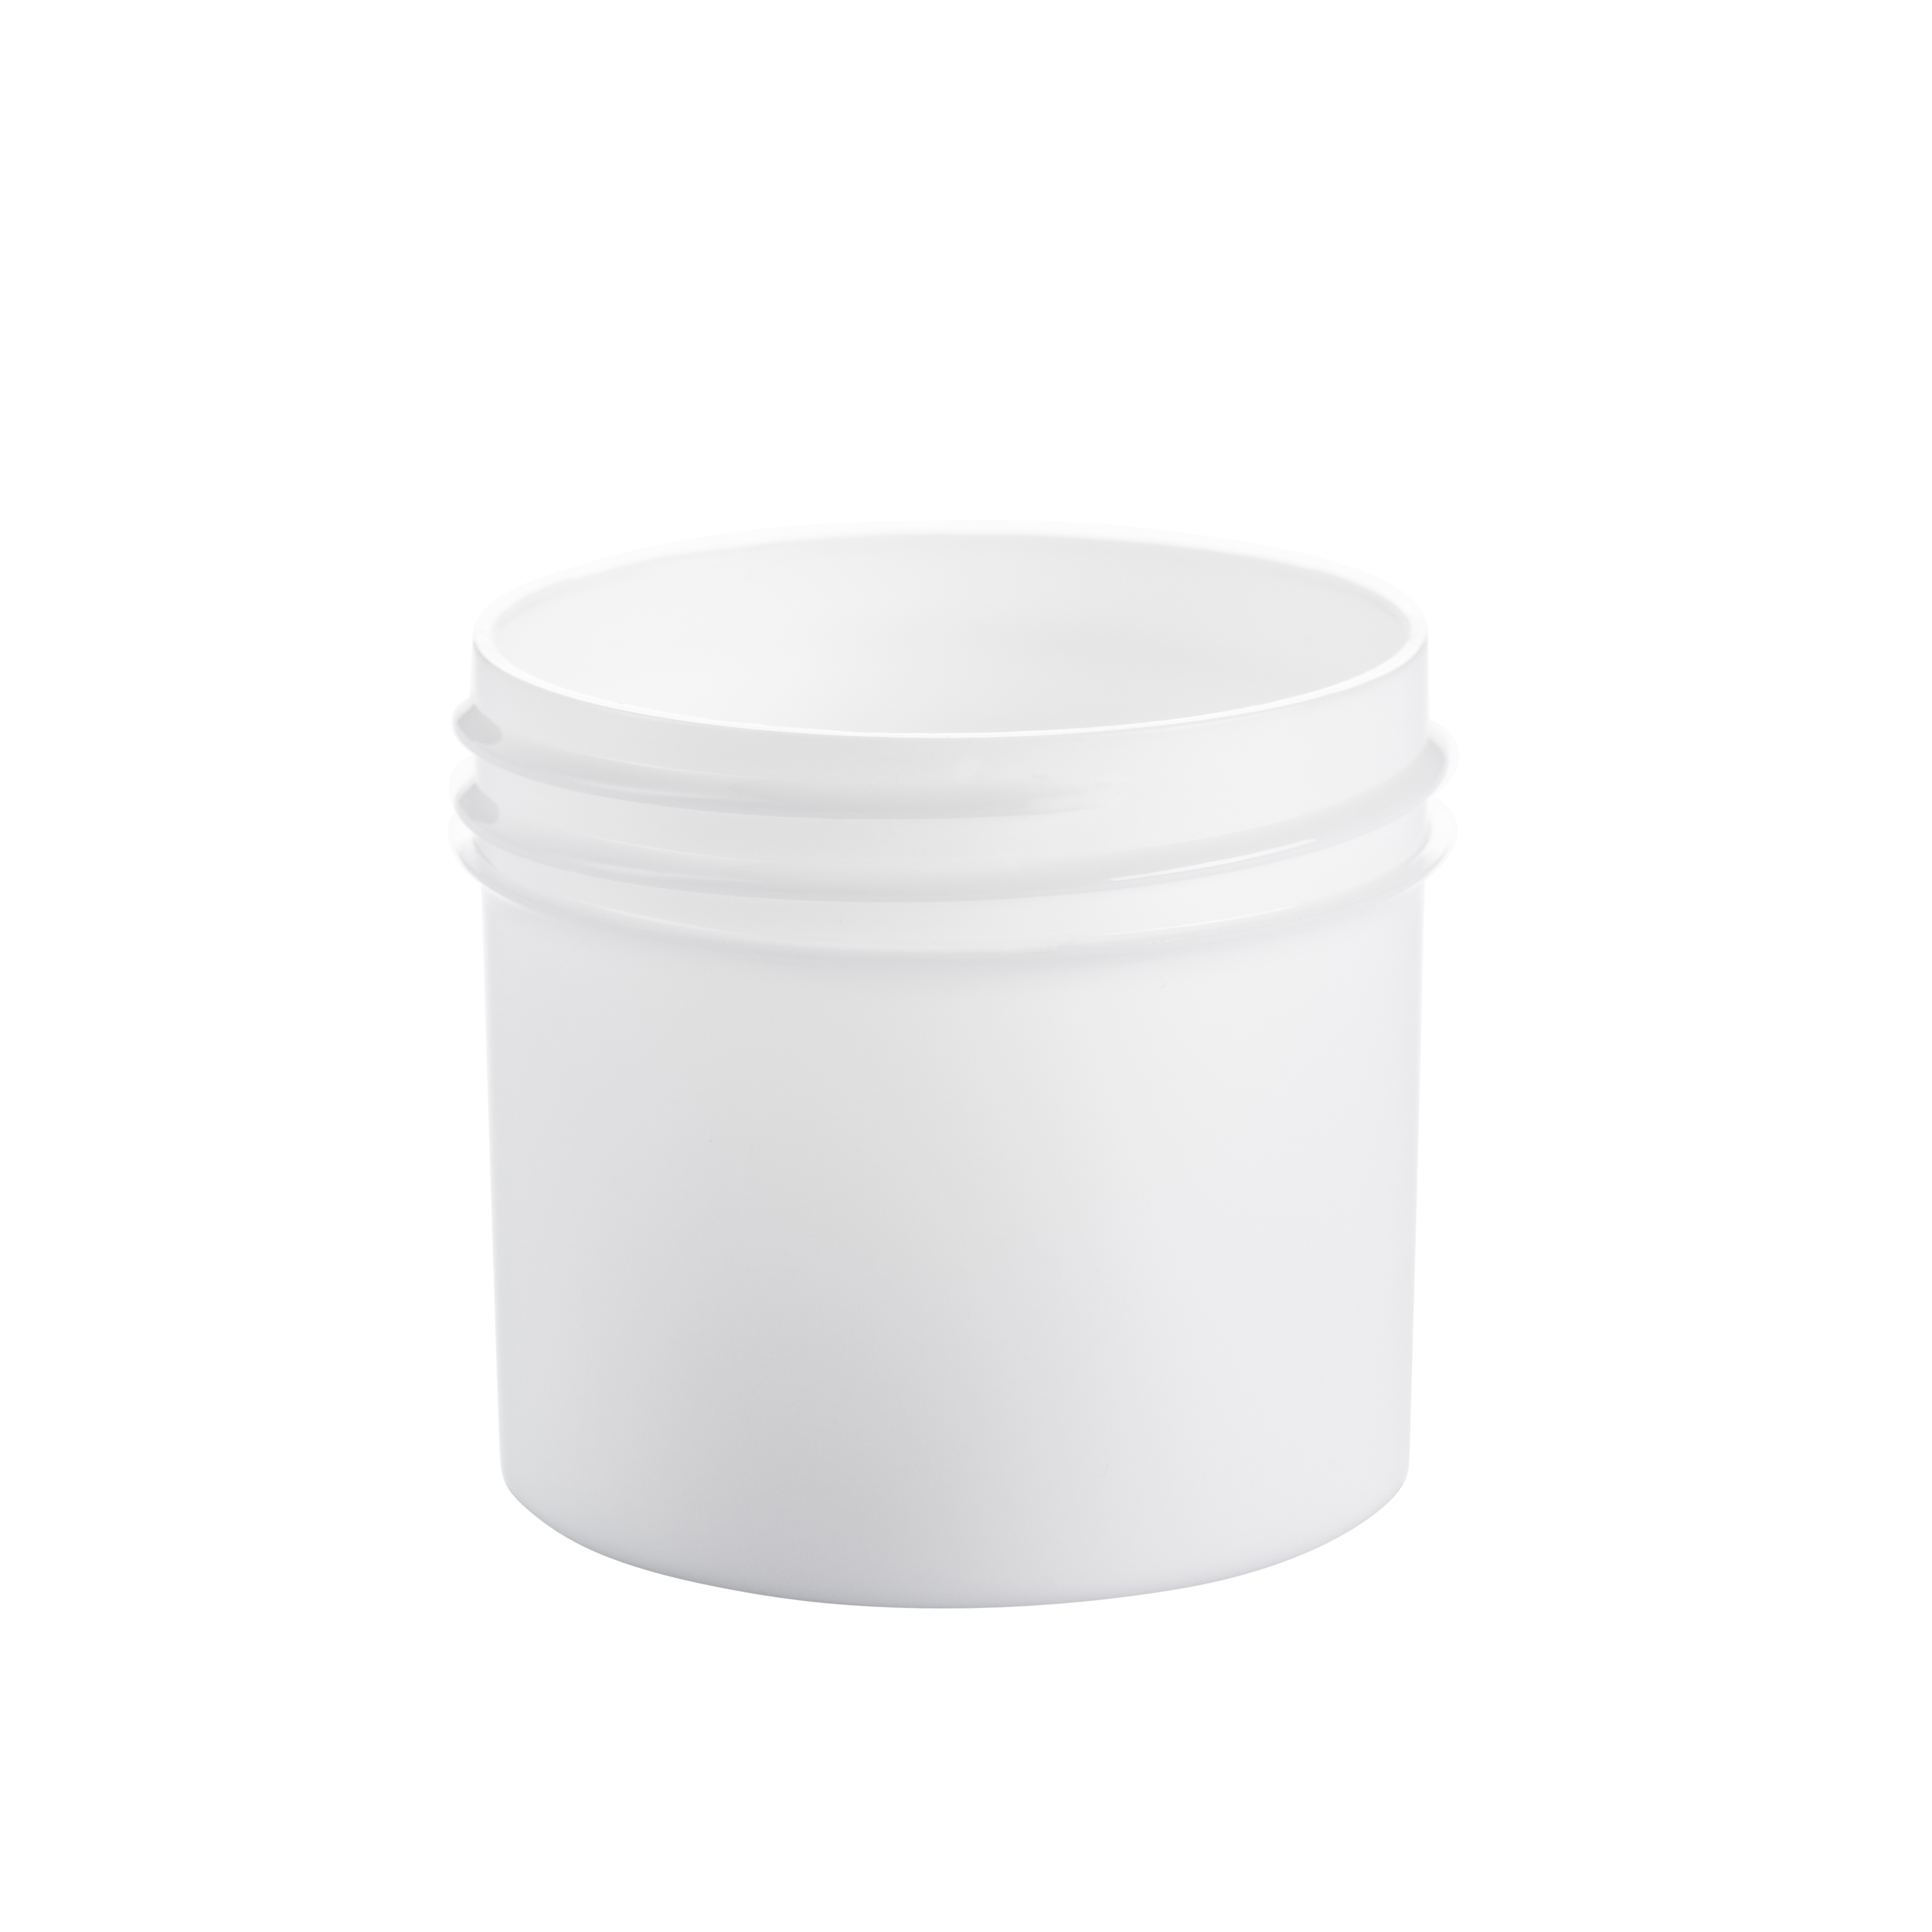 Small white cylinder